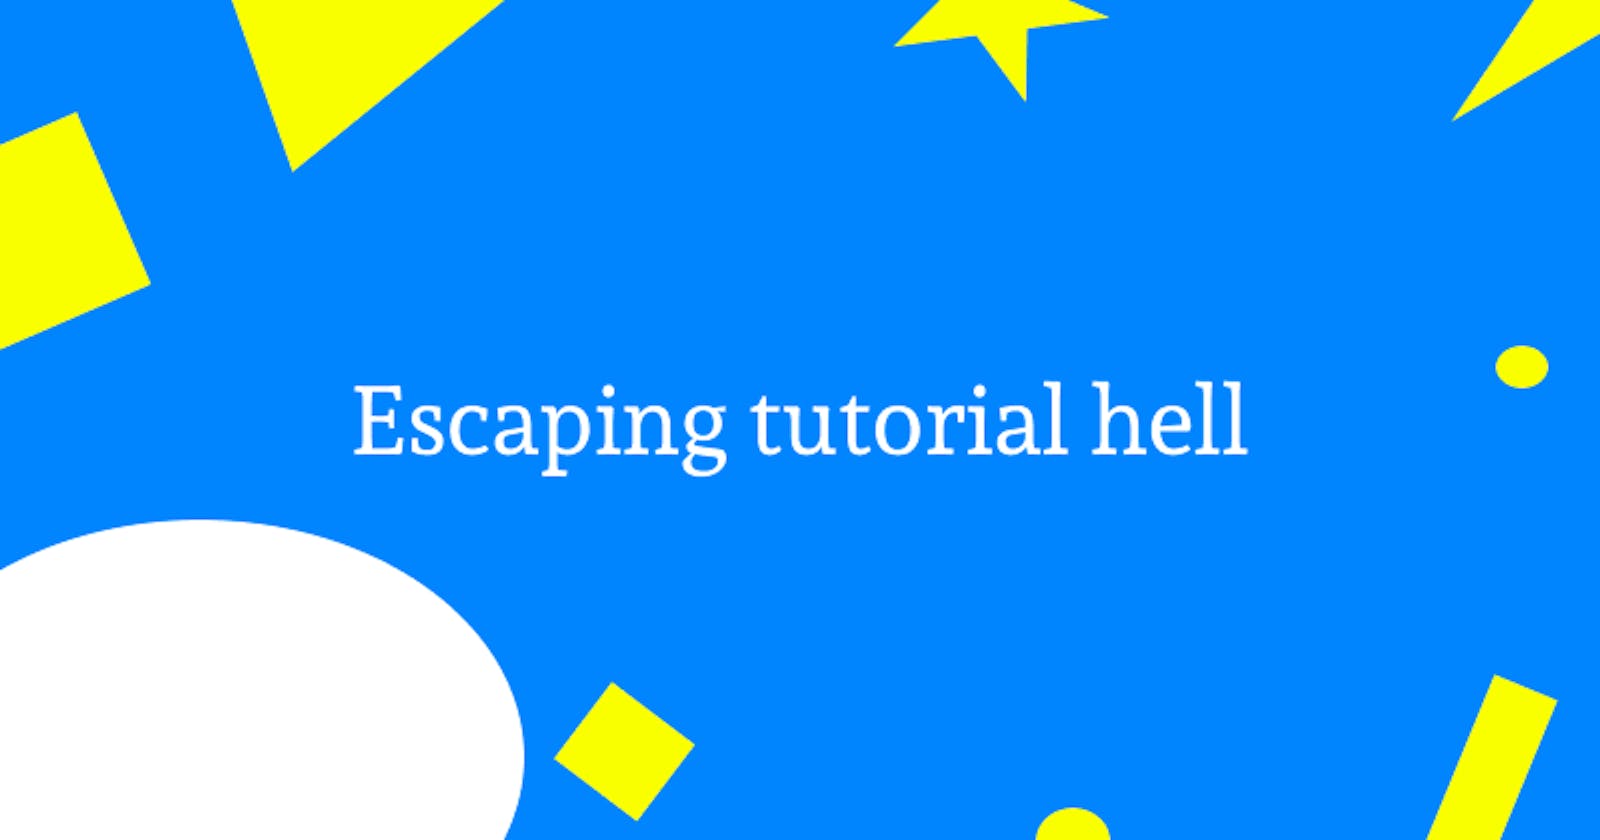 10 project ideas to help escape tutorial hell